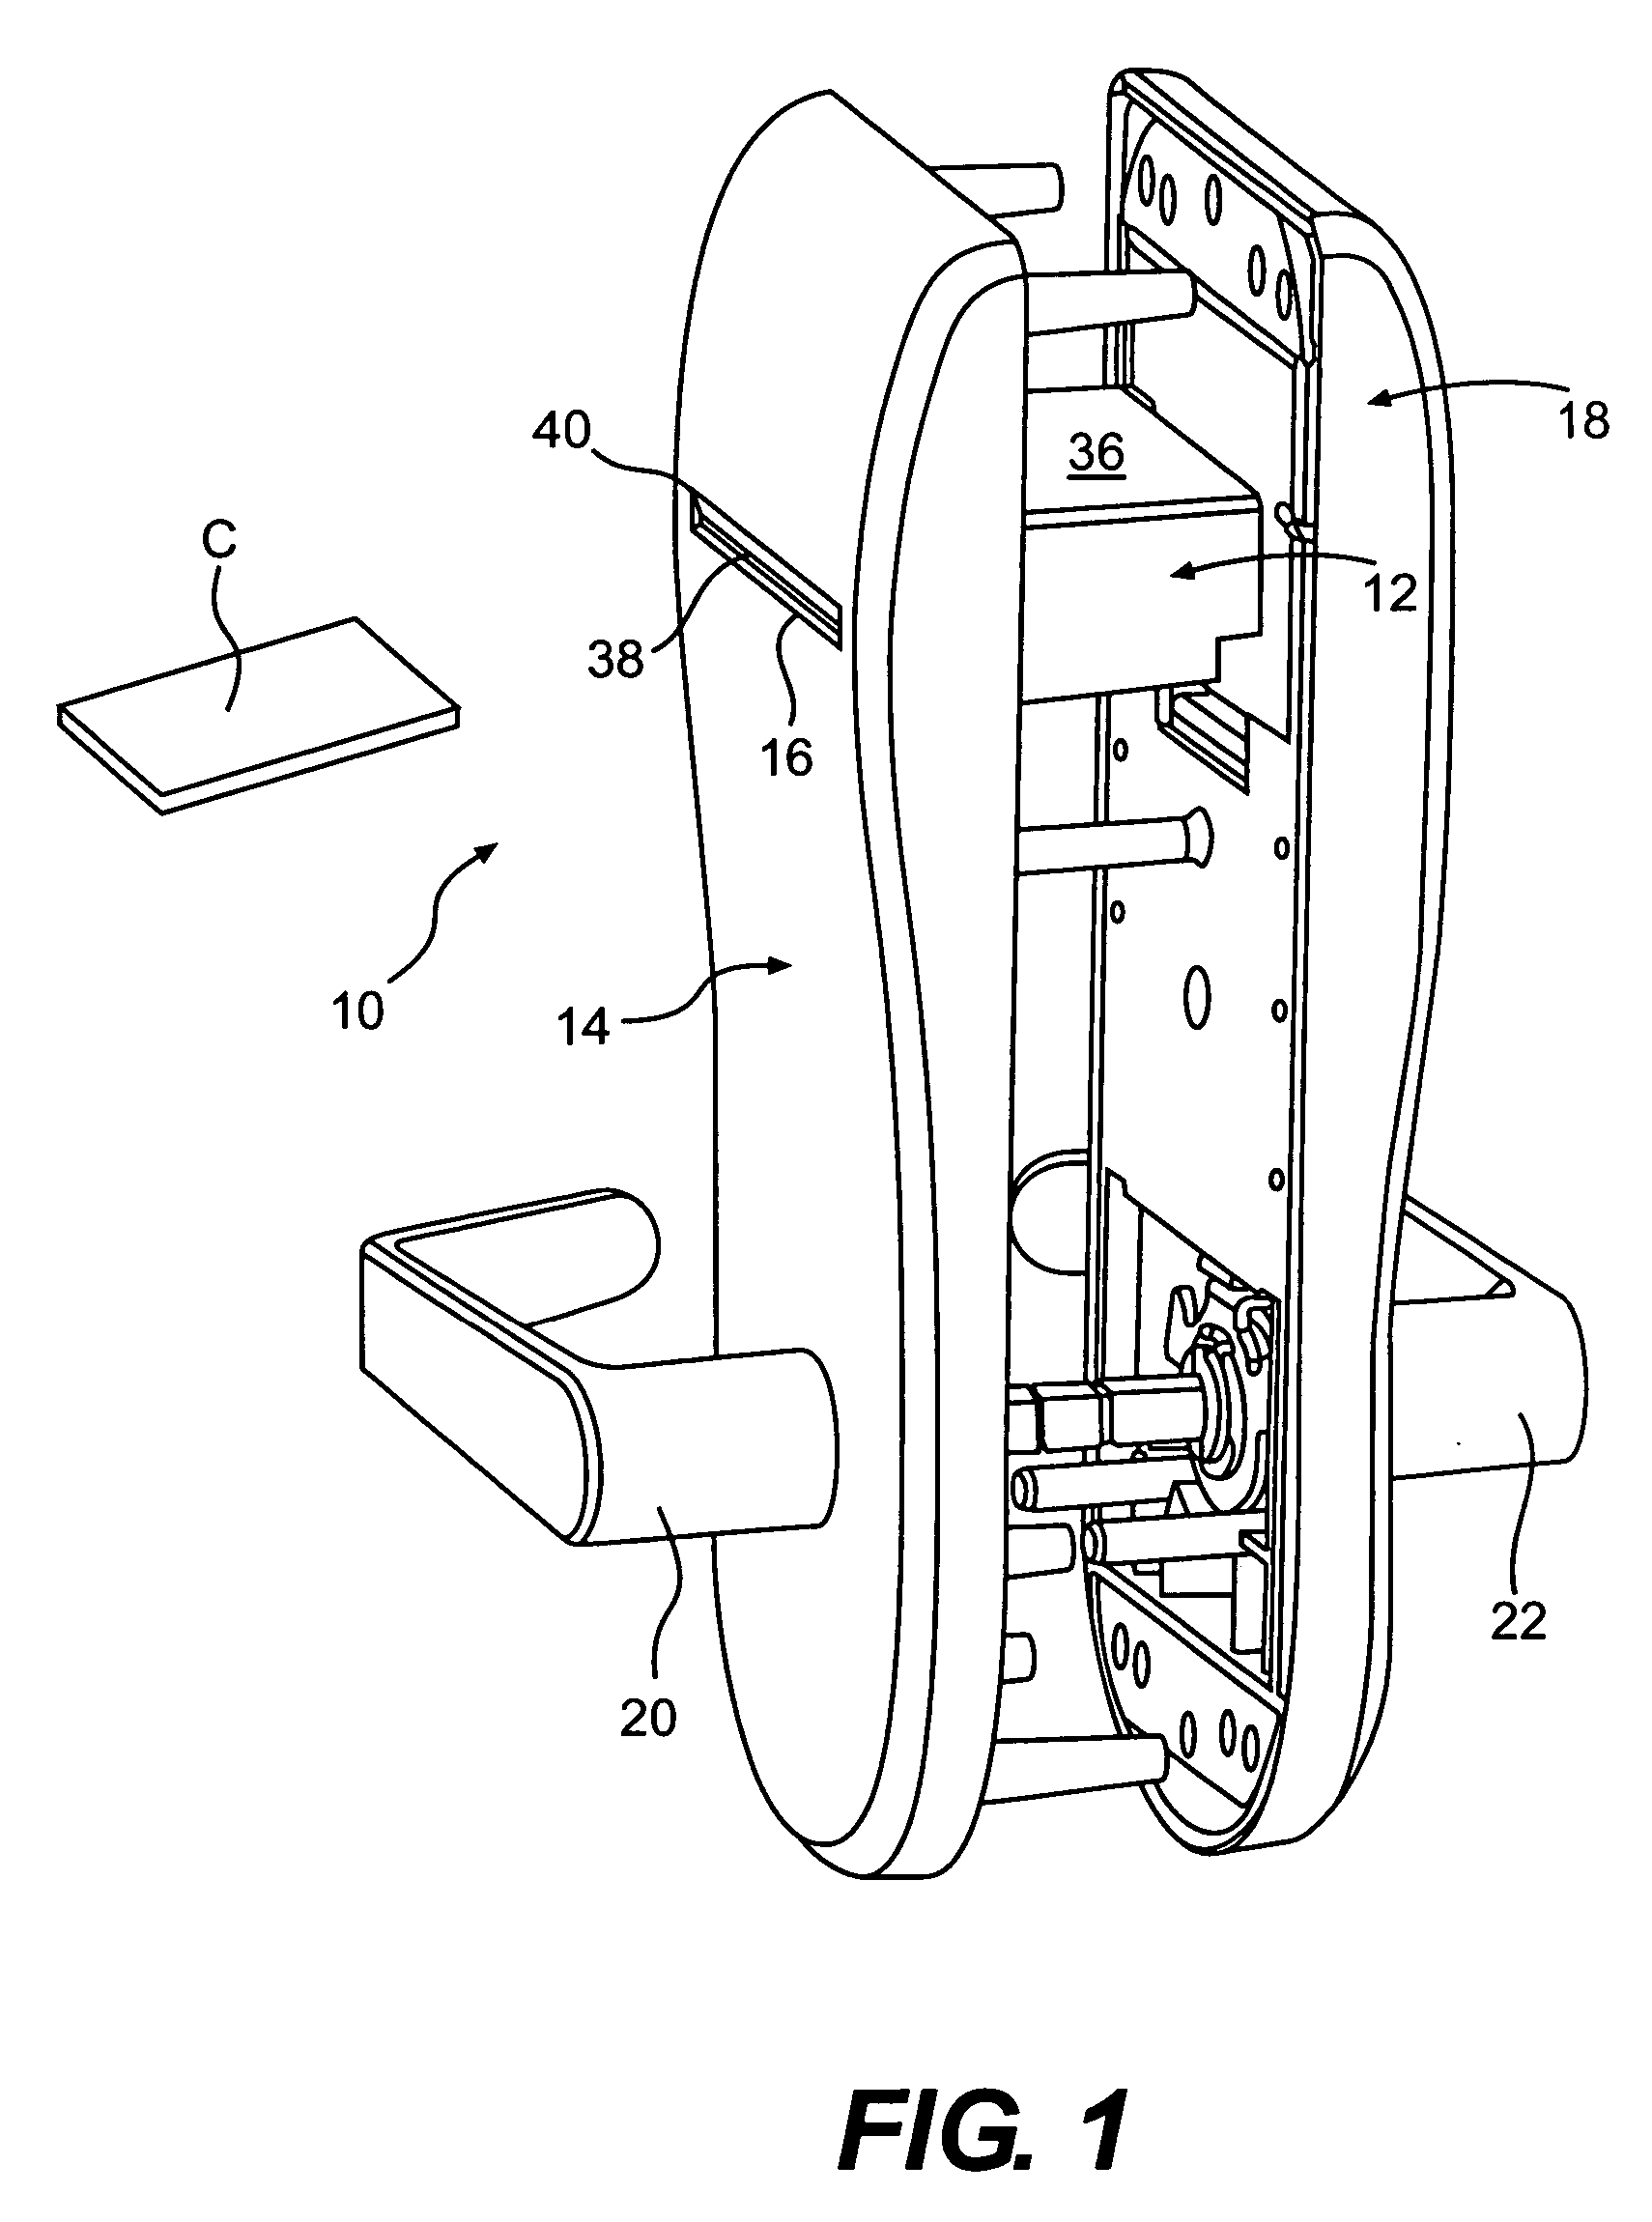 Water resistant keycard reader assembly for an electronic lock